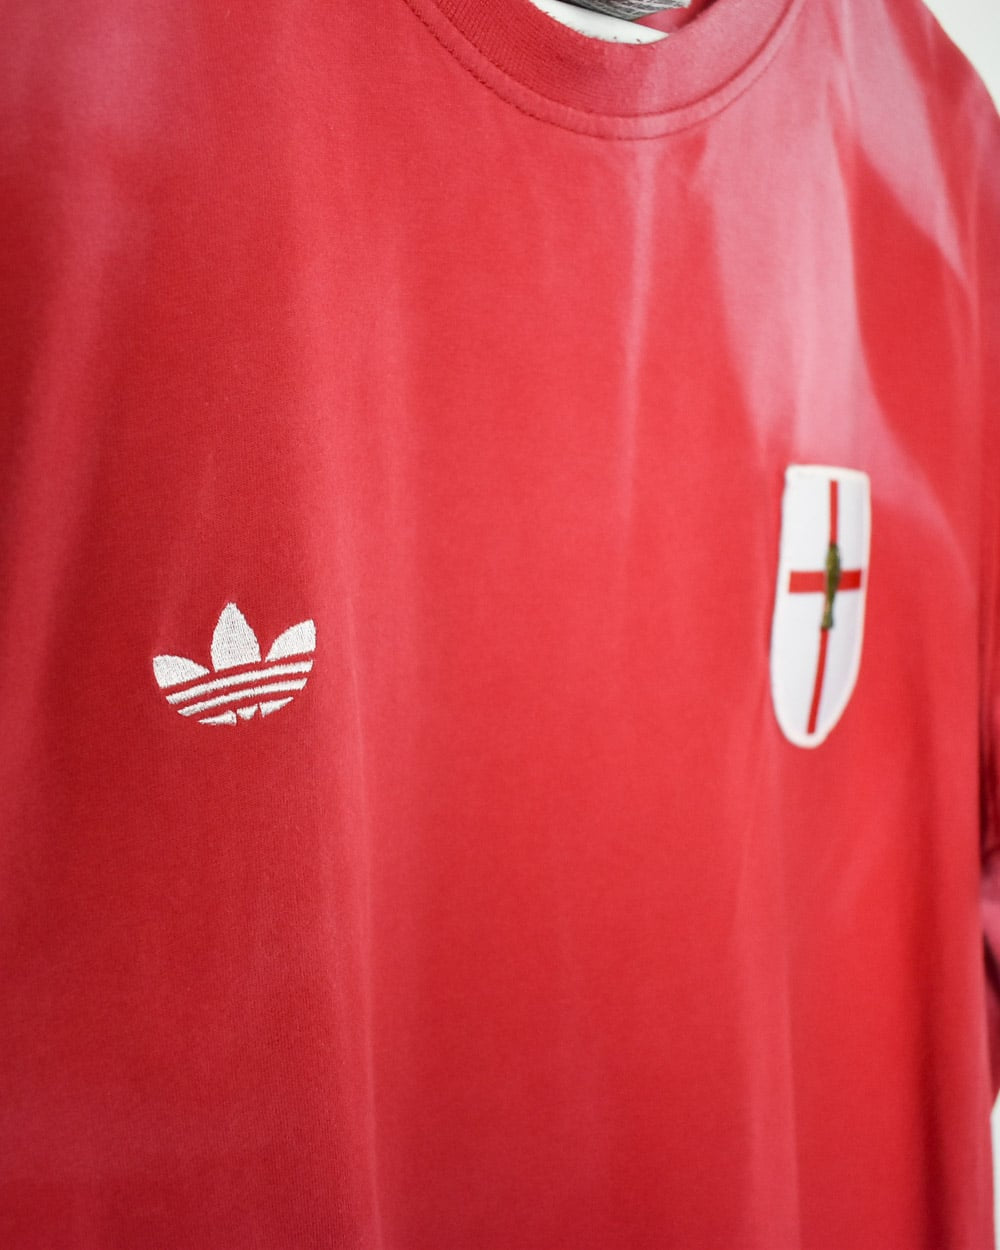 Red Adidas France 98 England Dyed T-Shirt - X-Large